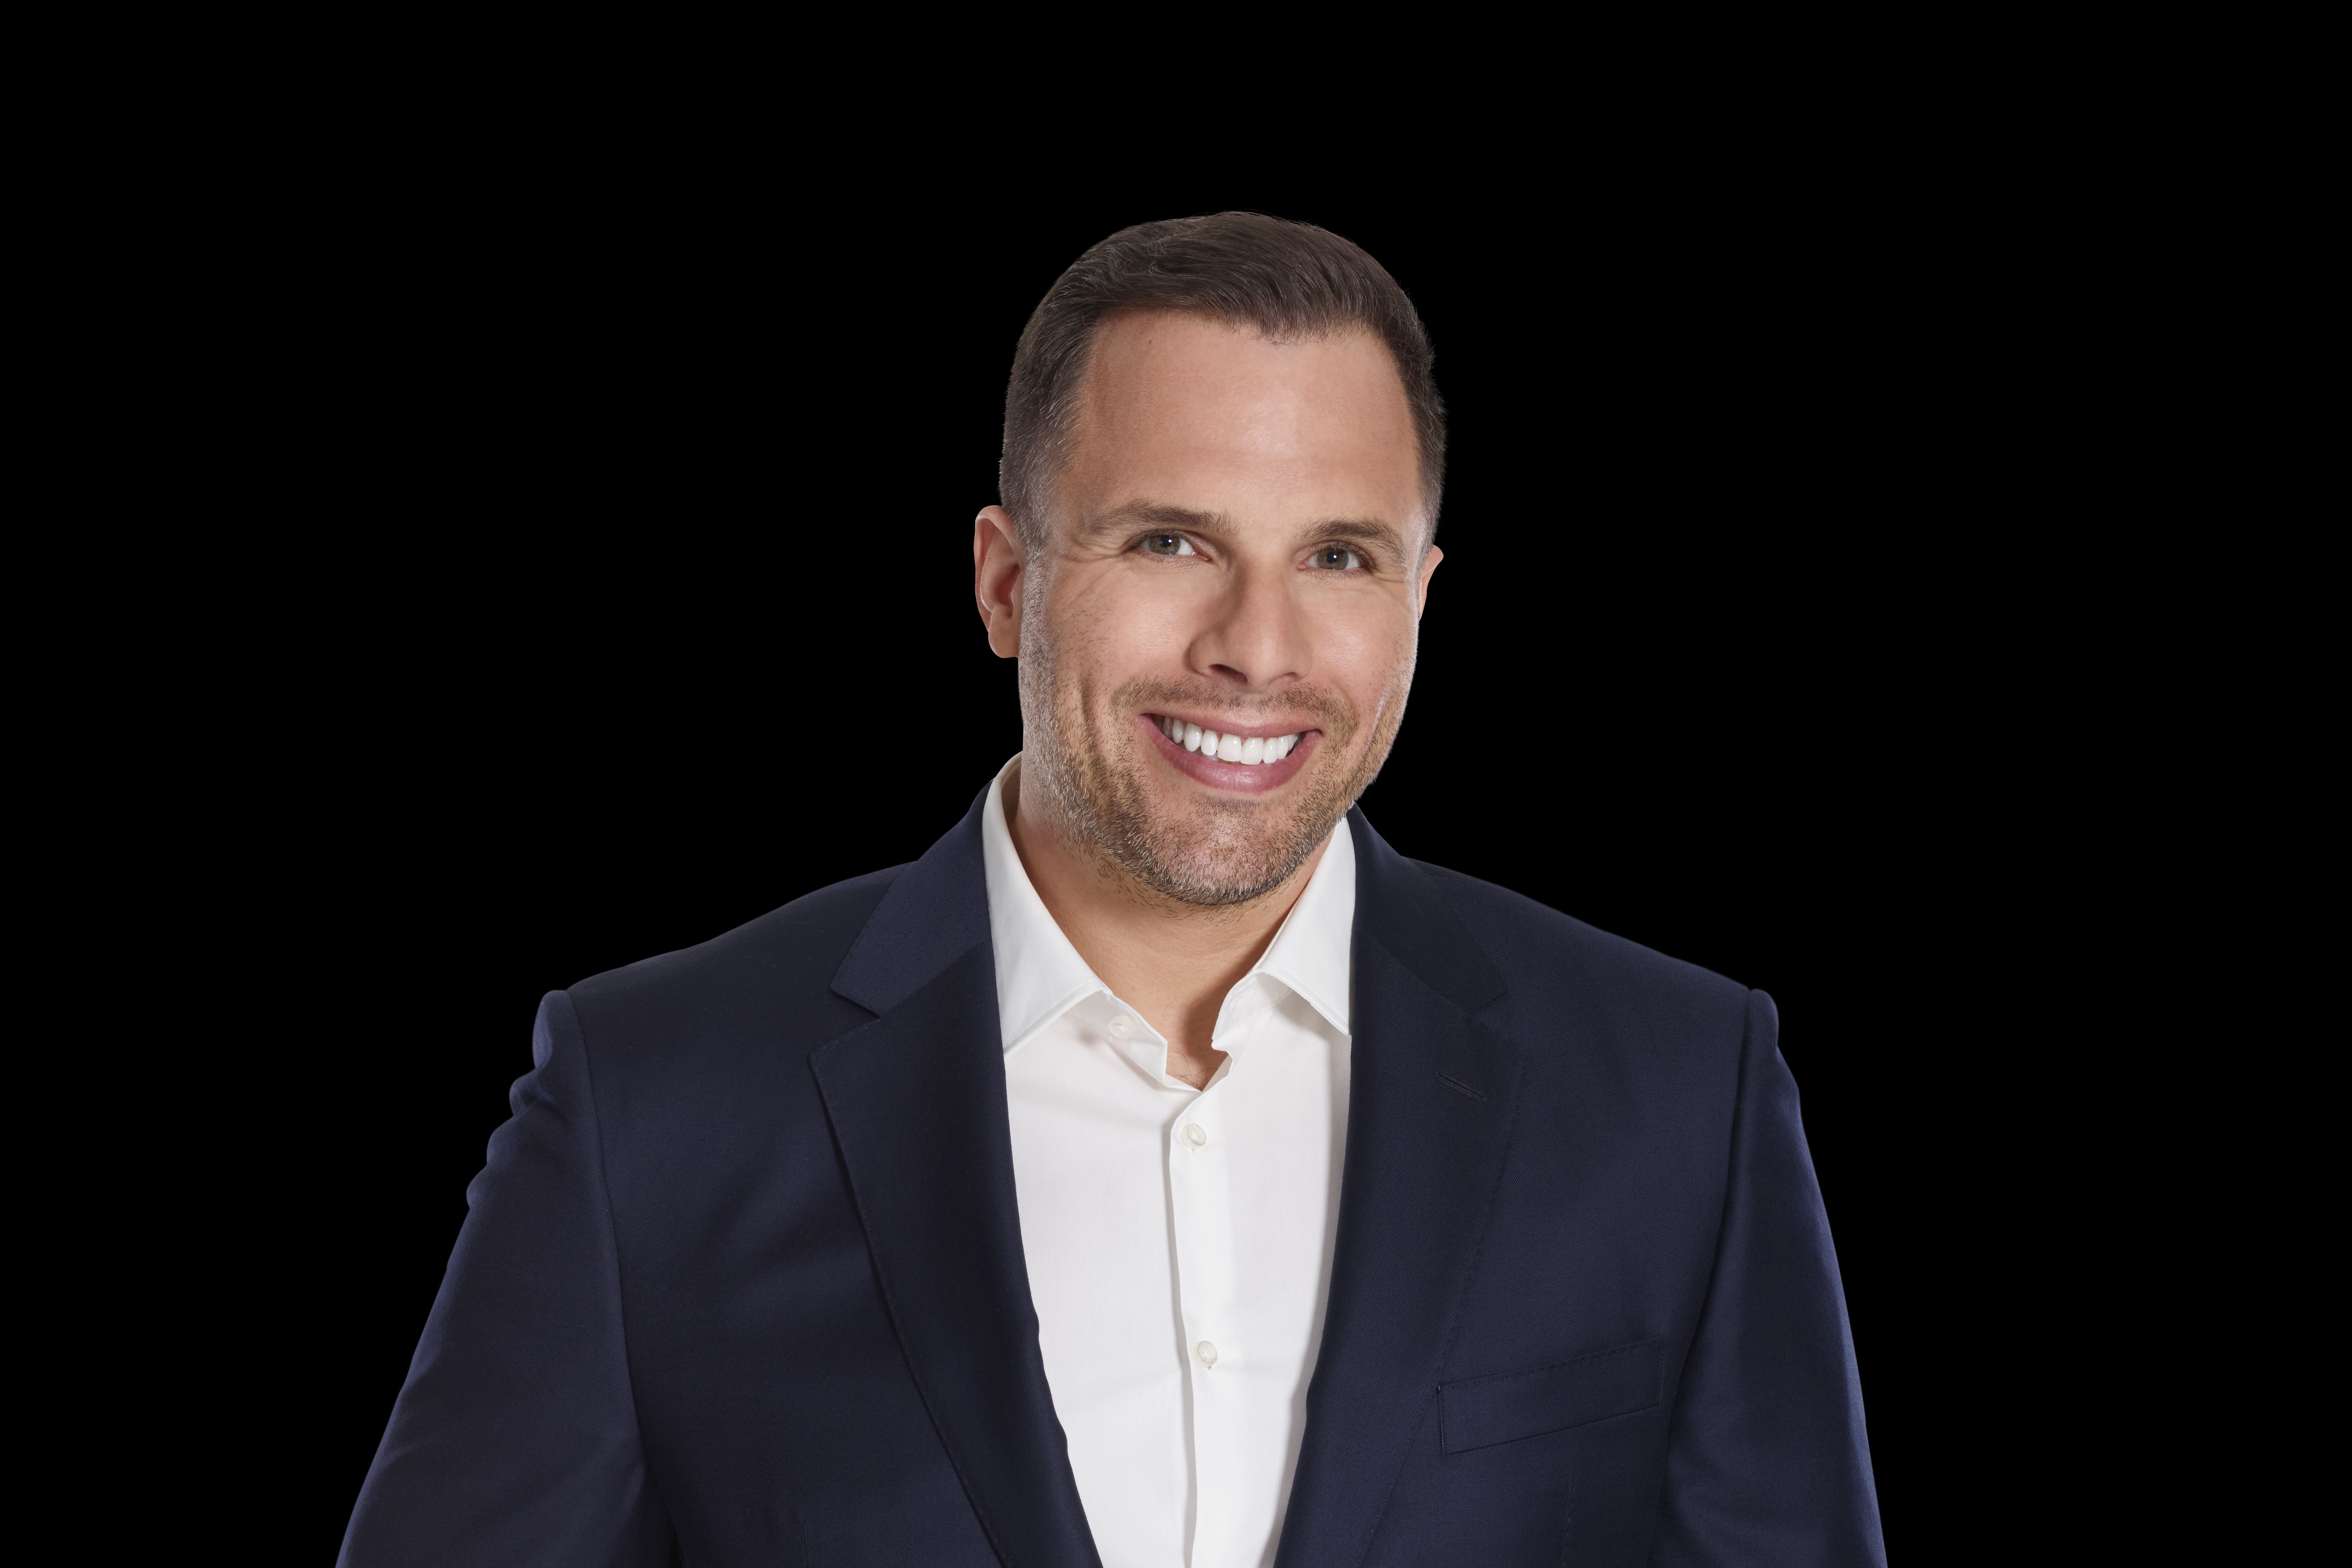 GB News presenter Dan Wootton has apologised to Ava Evans for the exchange on his Monday night programme on GB News